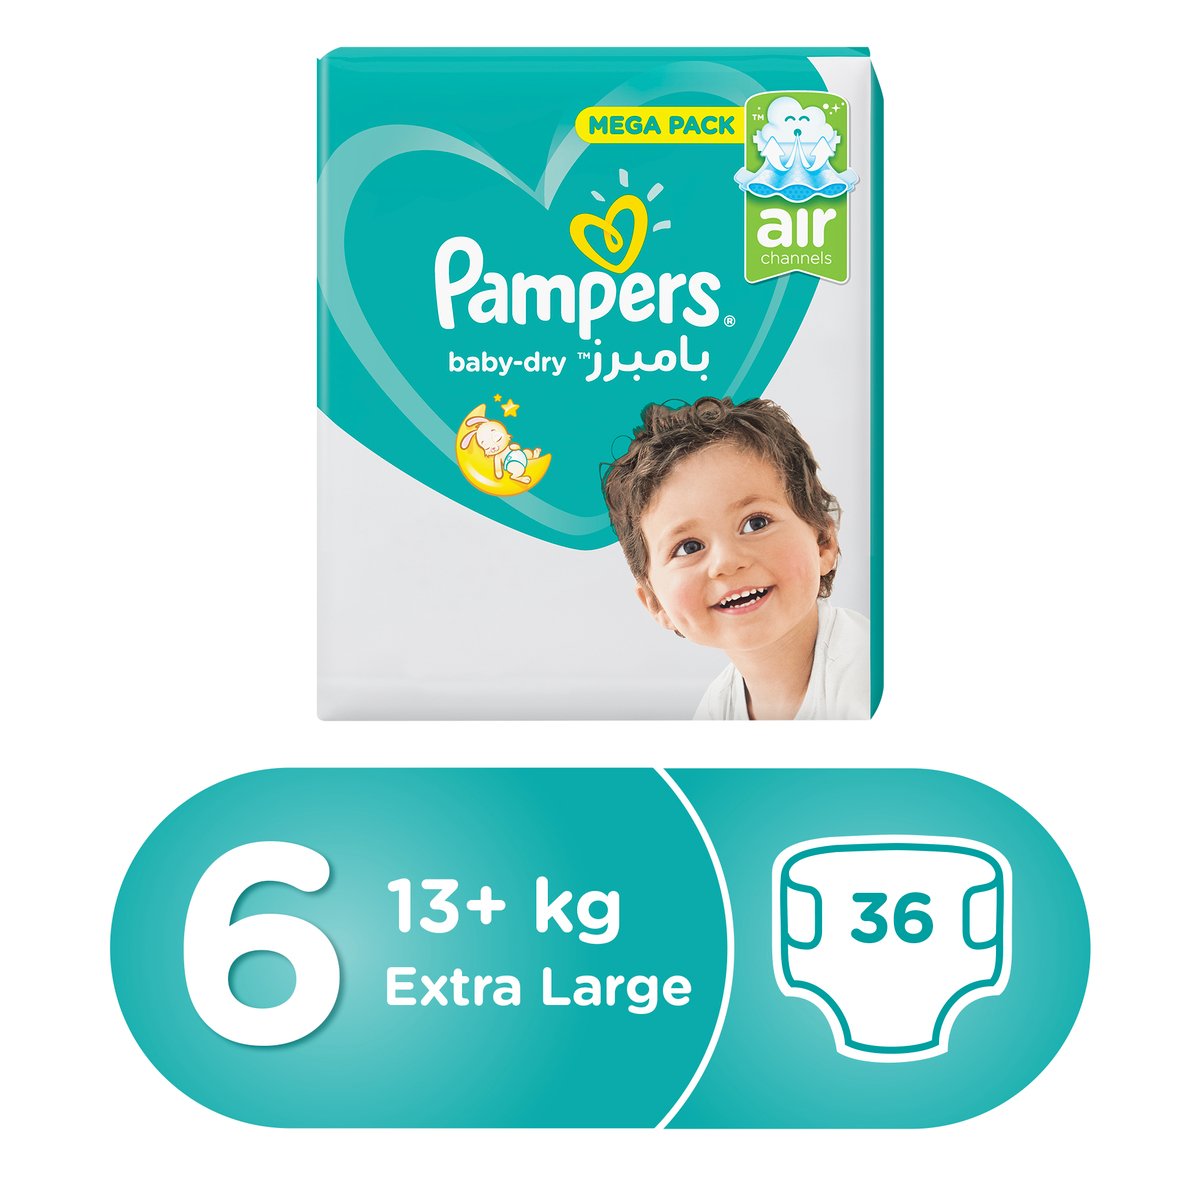 pampers active baby 6 extra large